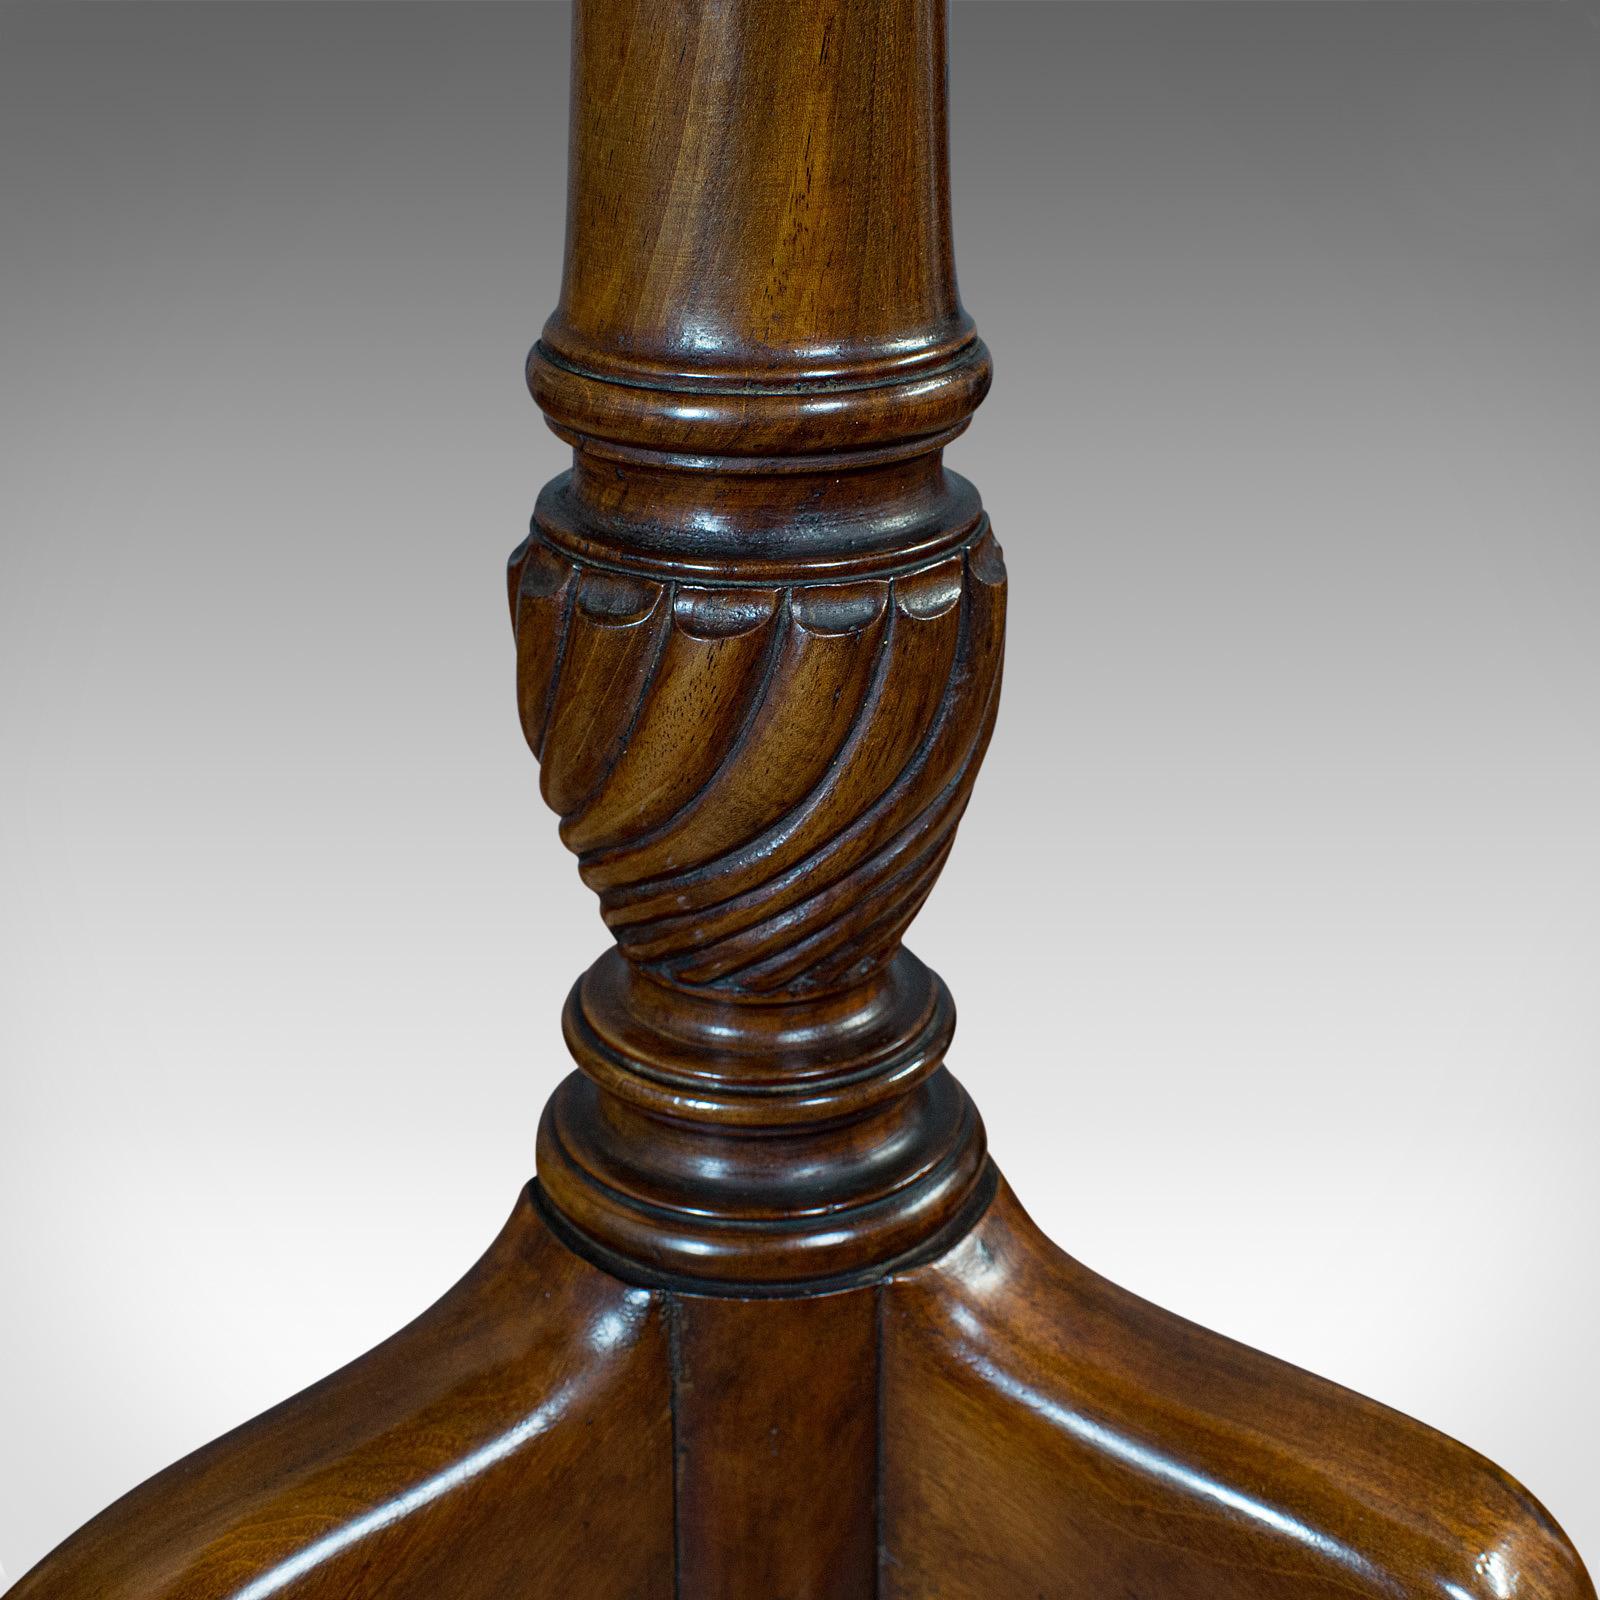 Mahogany Antique Whatnot Stand, Two-Tier Dumb Waiter, Tea Table, Victorian, 1900 For Sale